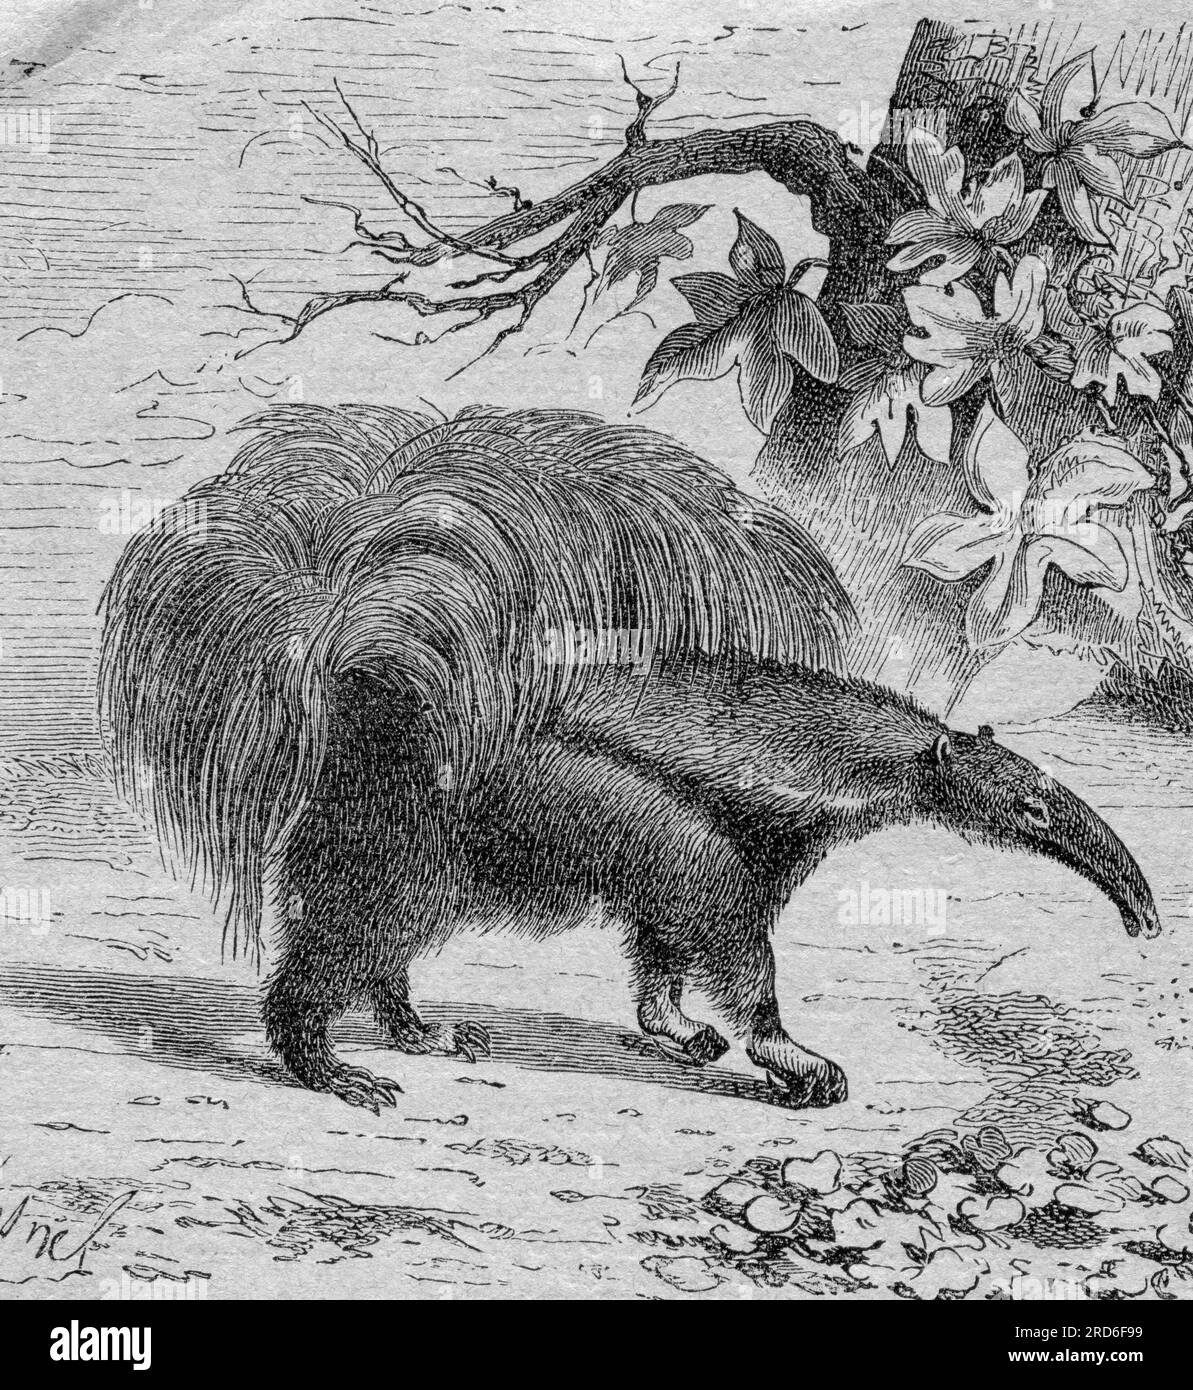 zoology / animals, ant bear, great anteater (Myrmecophaga tridactyla), wood engraving, 19th century, ARTIST'S COPYRIGHT HAS NOT TO BE CLEARED Stock Photo